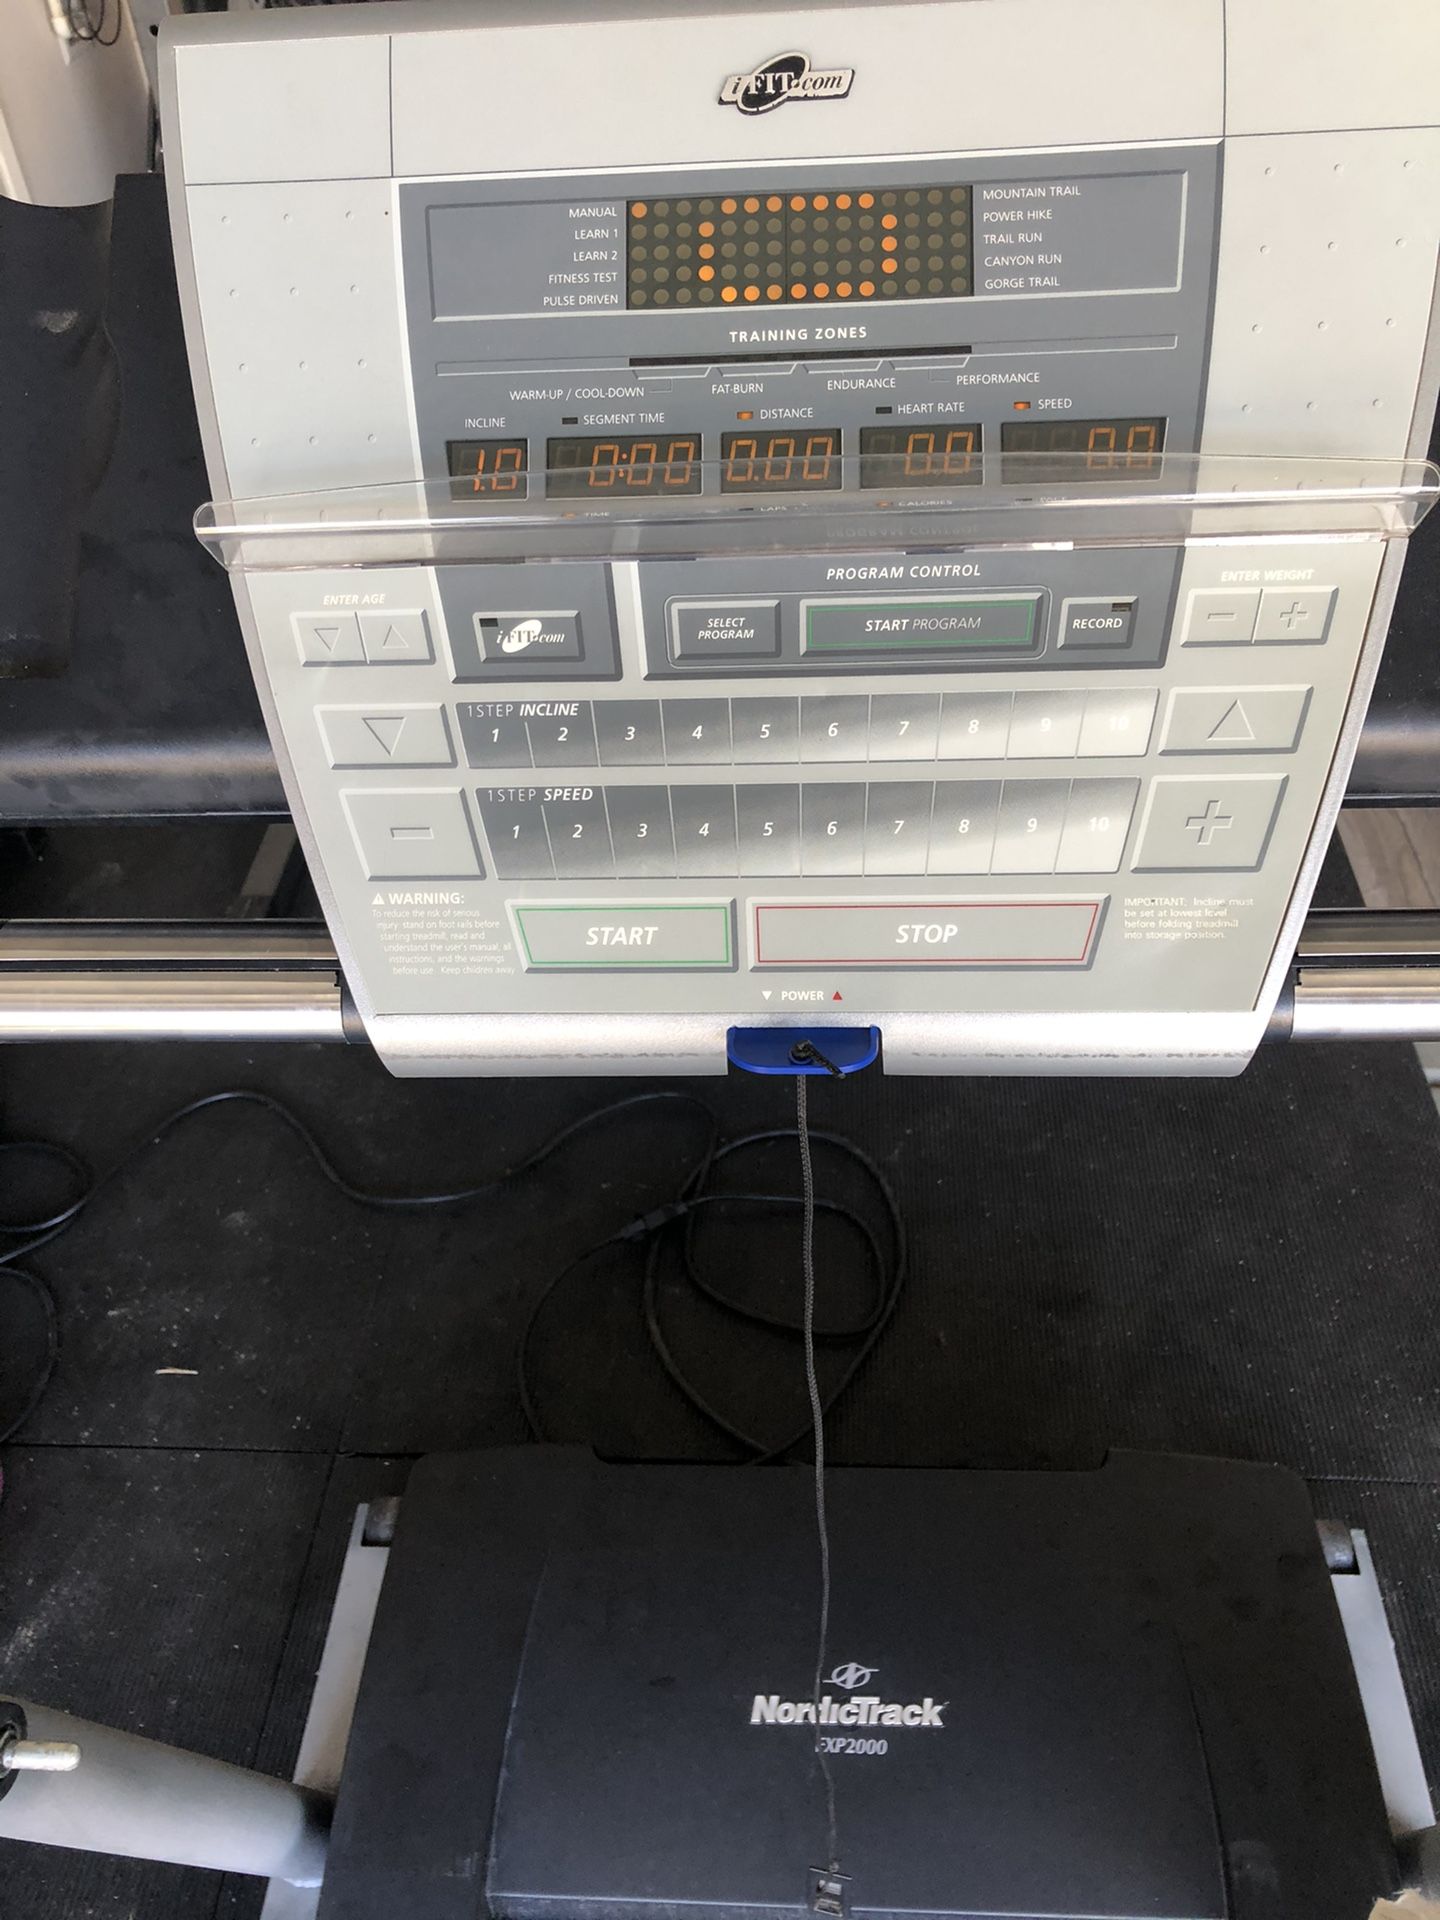 NordicTrack Treadmill for parts still available if not marked sold